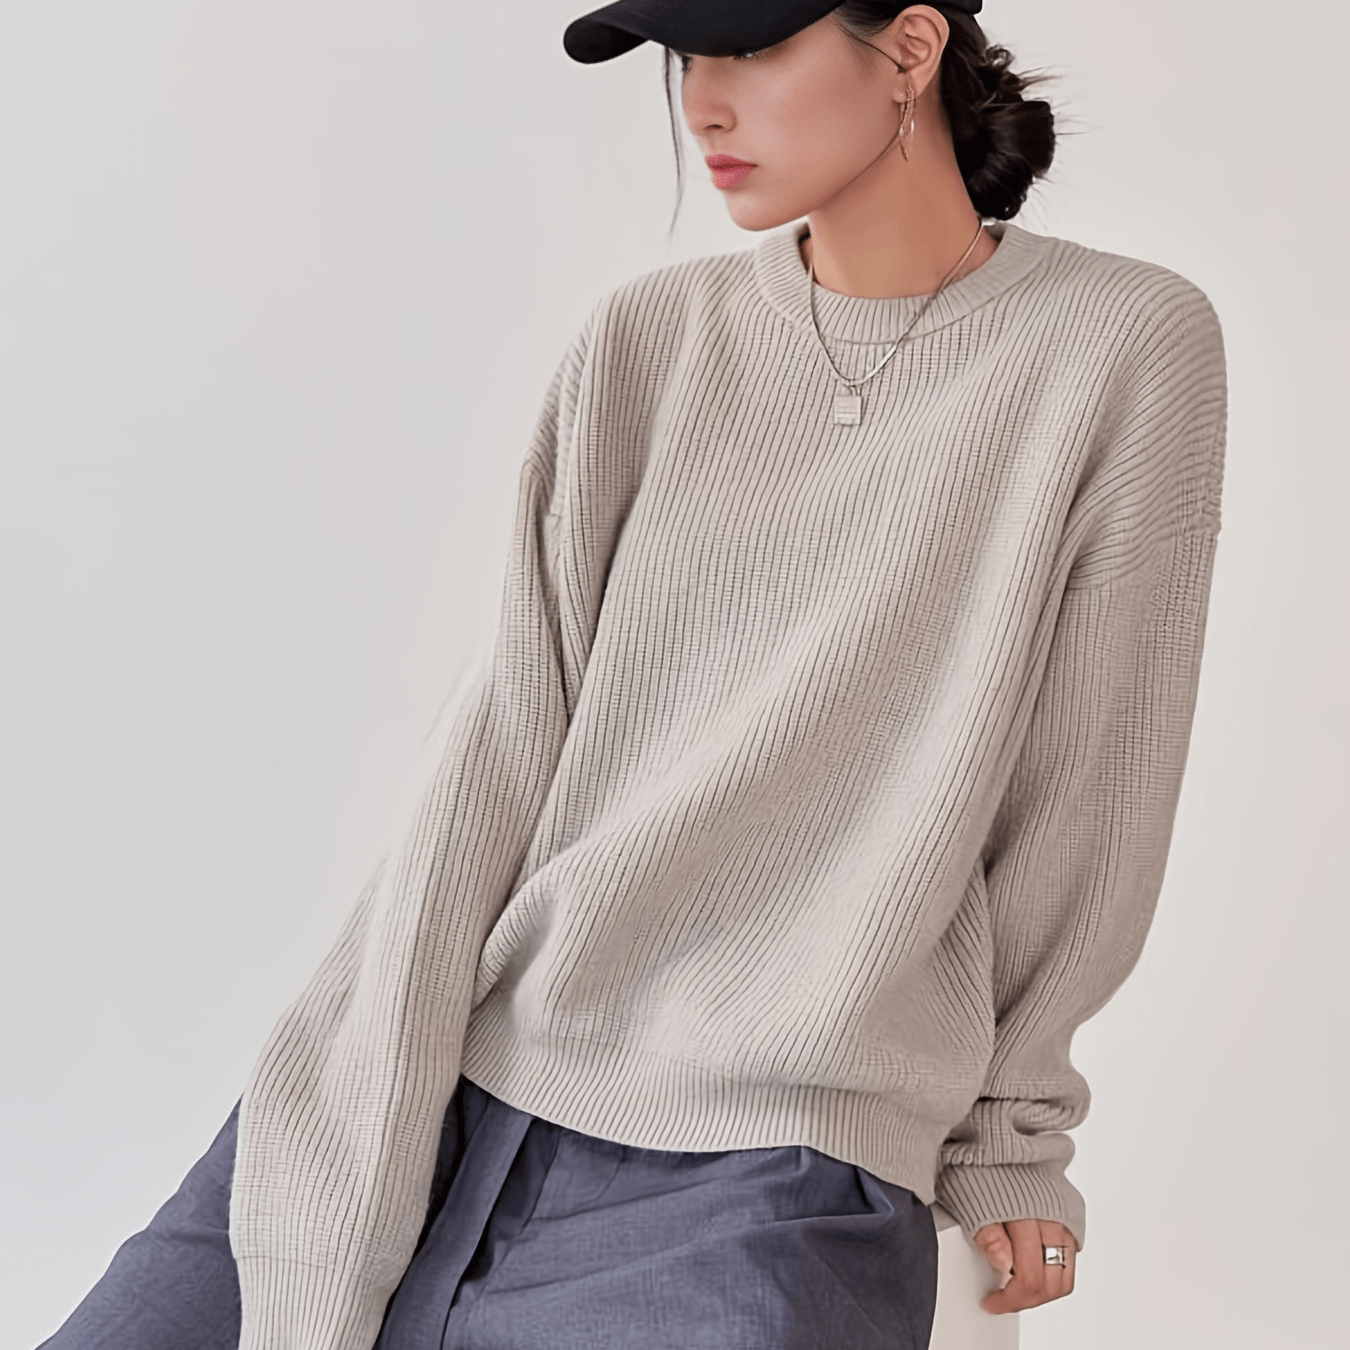 vlovelaw  Solid Ribbed Sweater, Casual Crew Neck Long Sleeve Sweater, Casual Tops For Fall & Winter, Women's Clothing